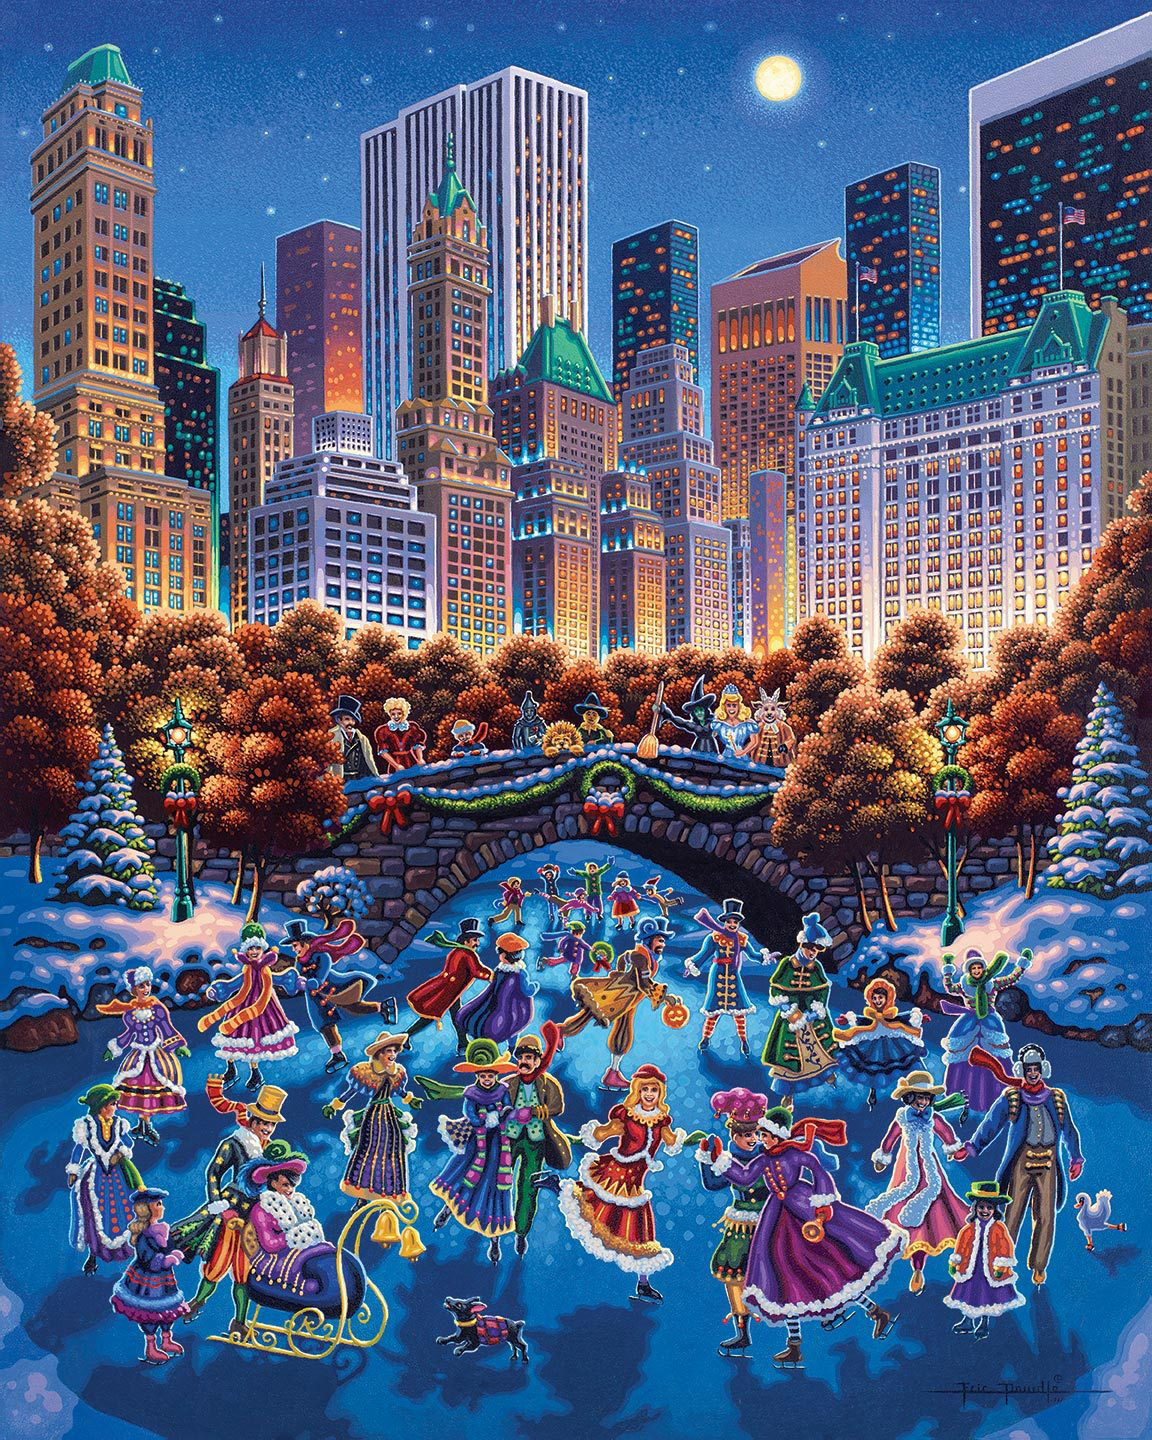 Central Park Winter Jigsaw Puzzle